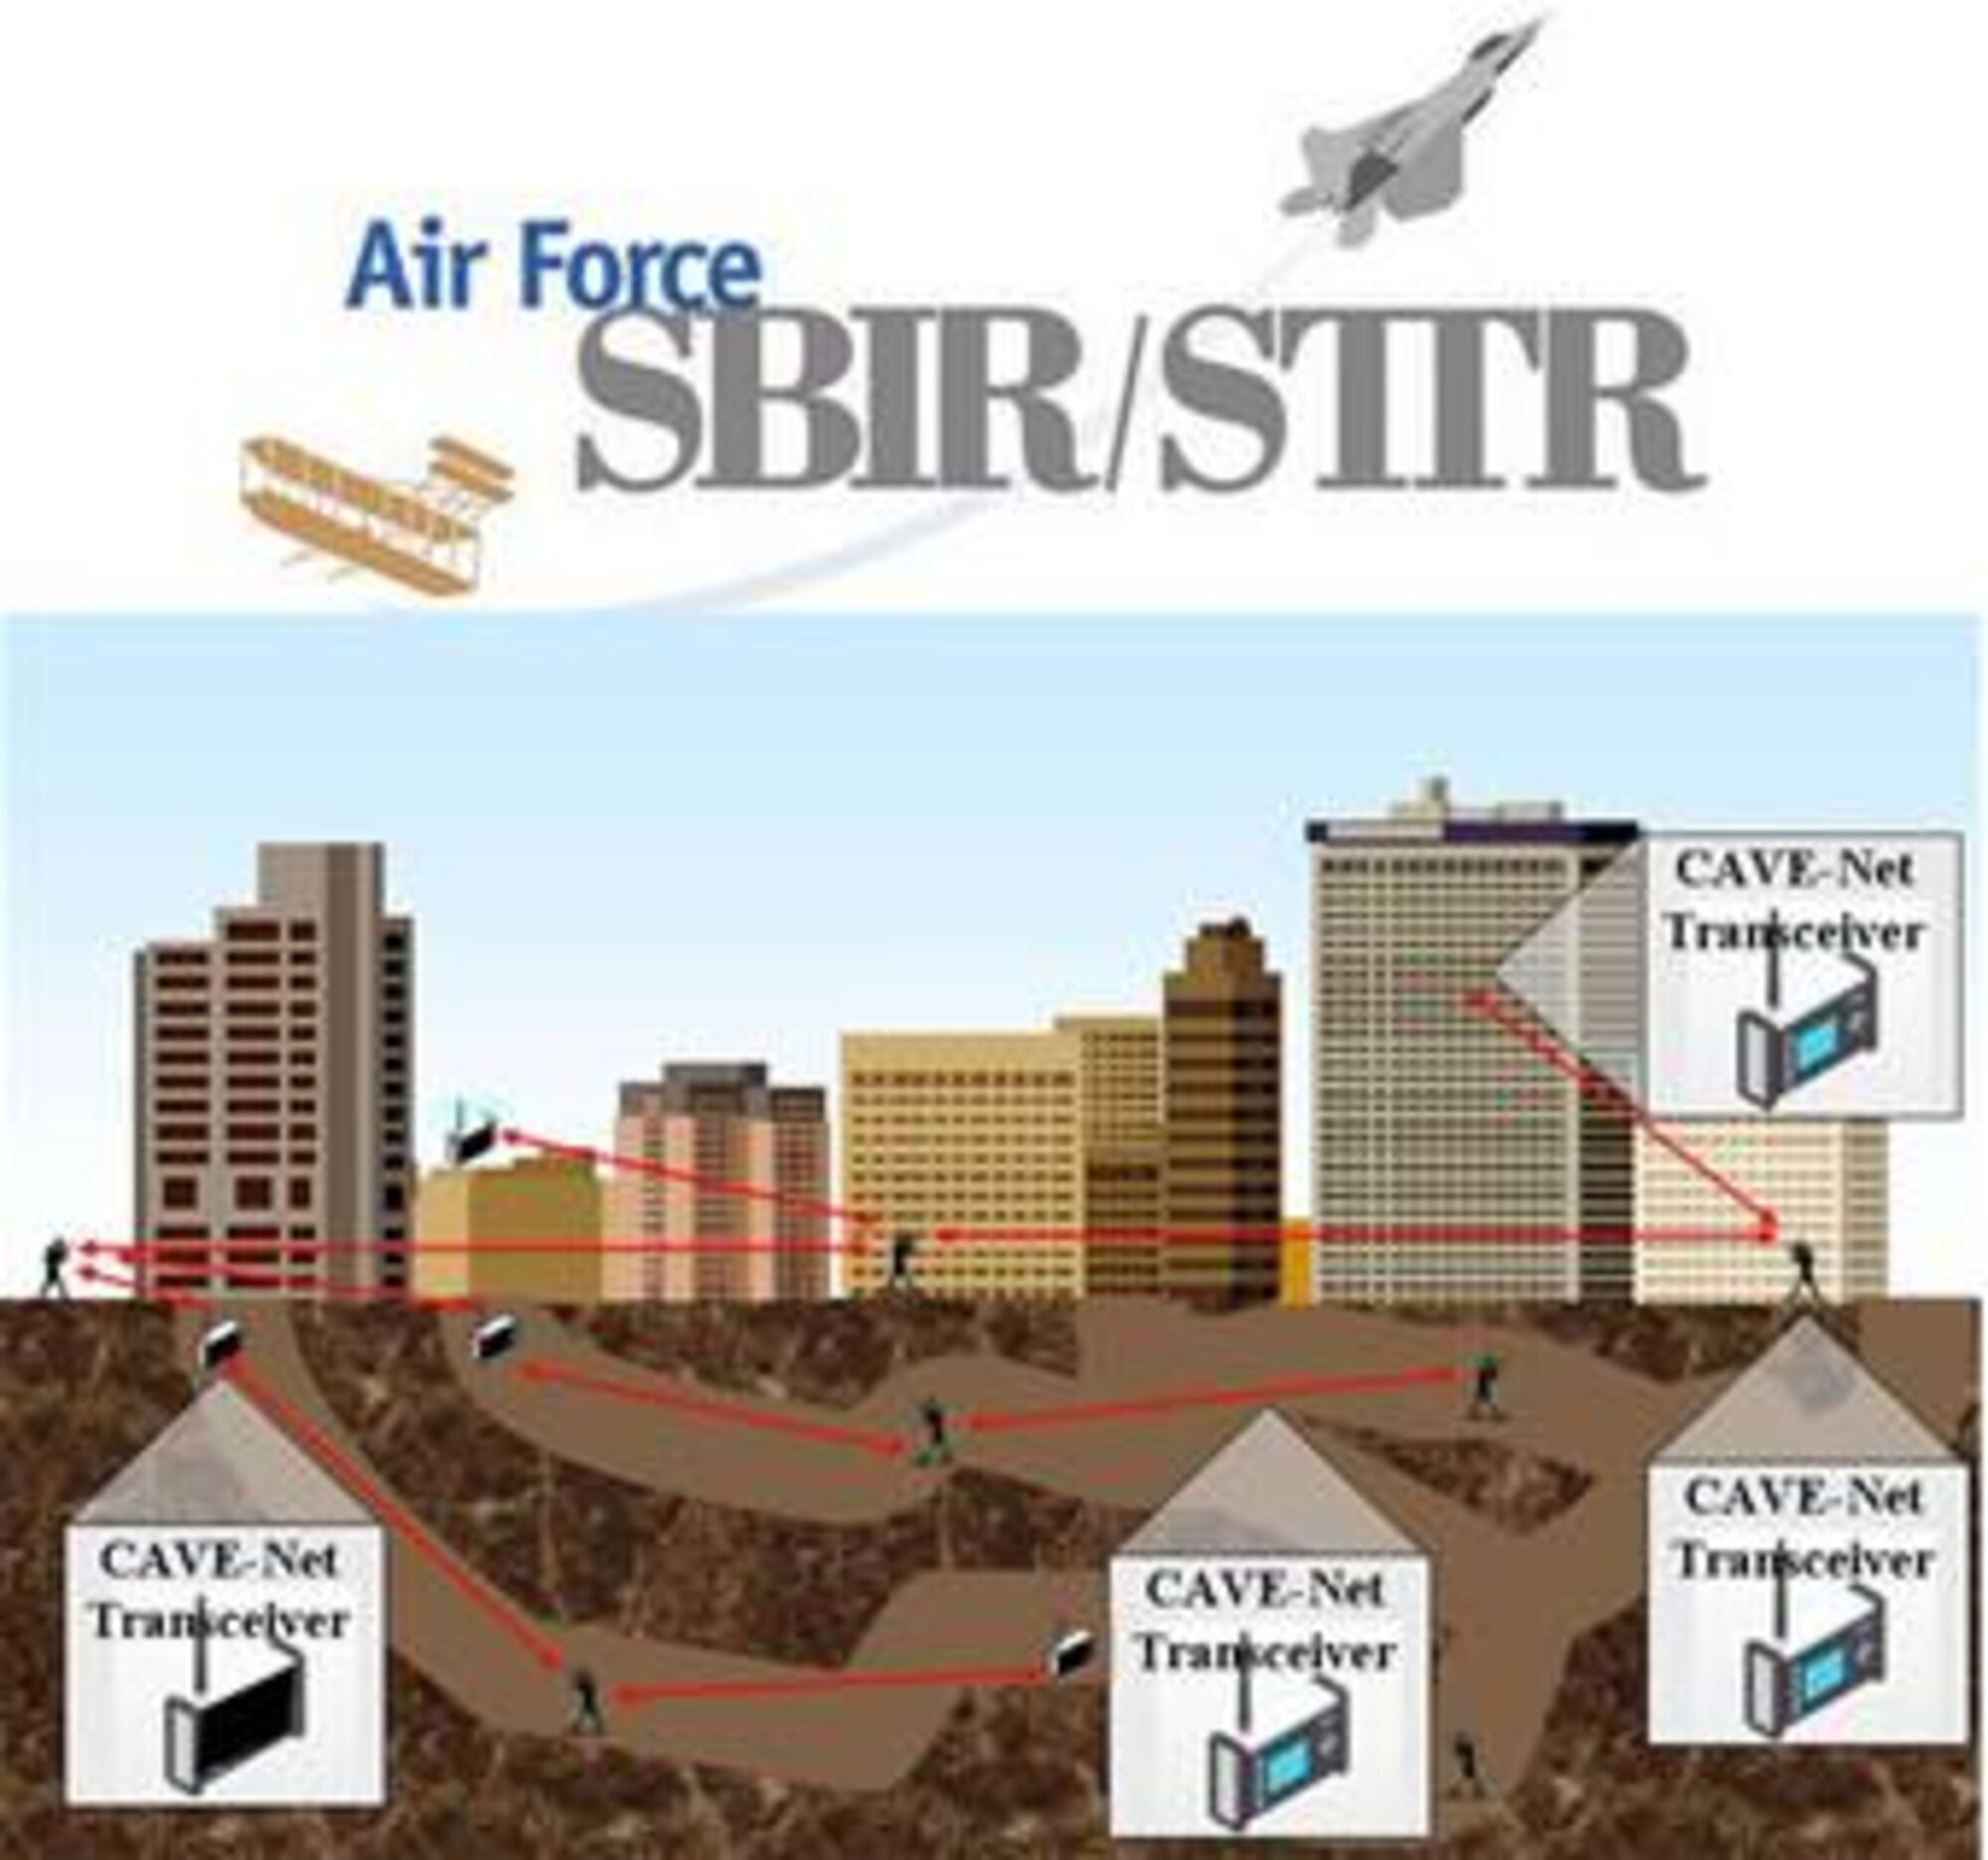 Office of Naval Research Using AFRL SBIR-Developed Technologies 